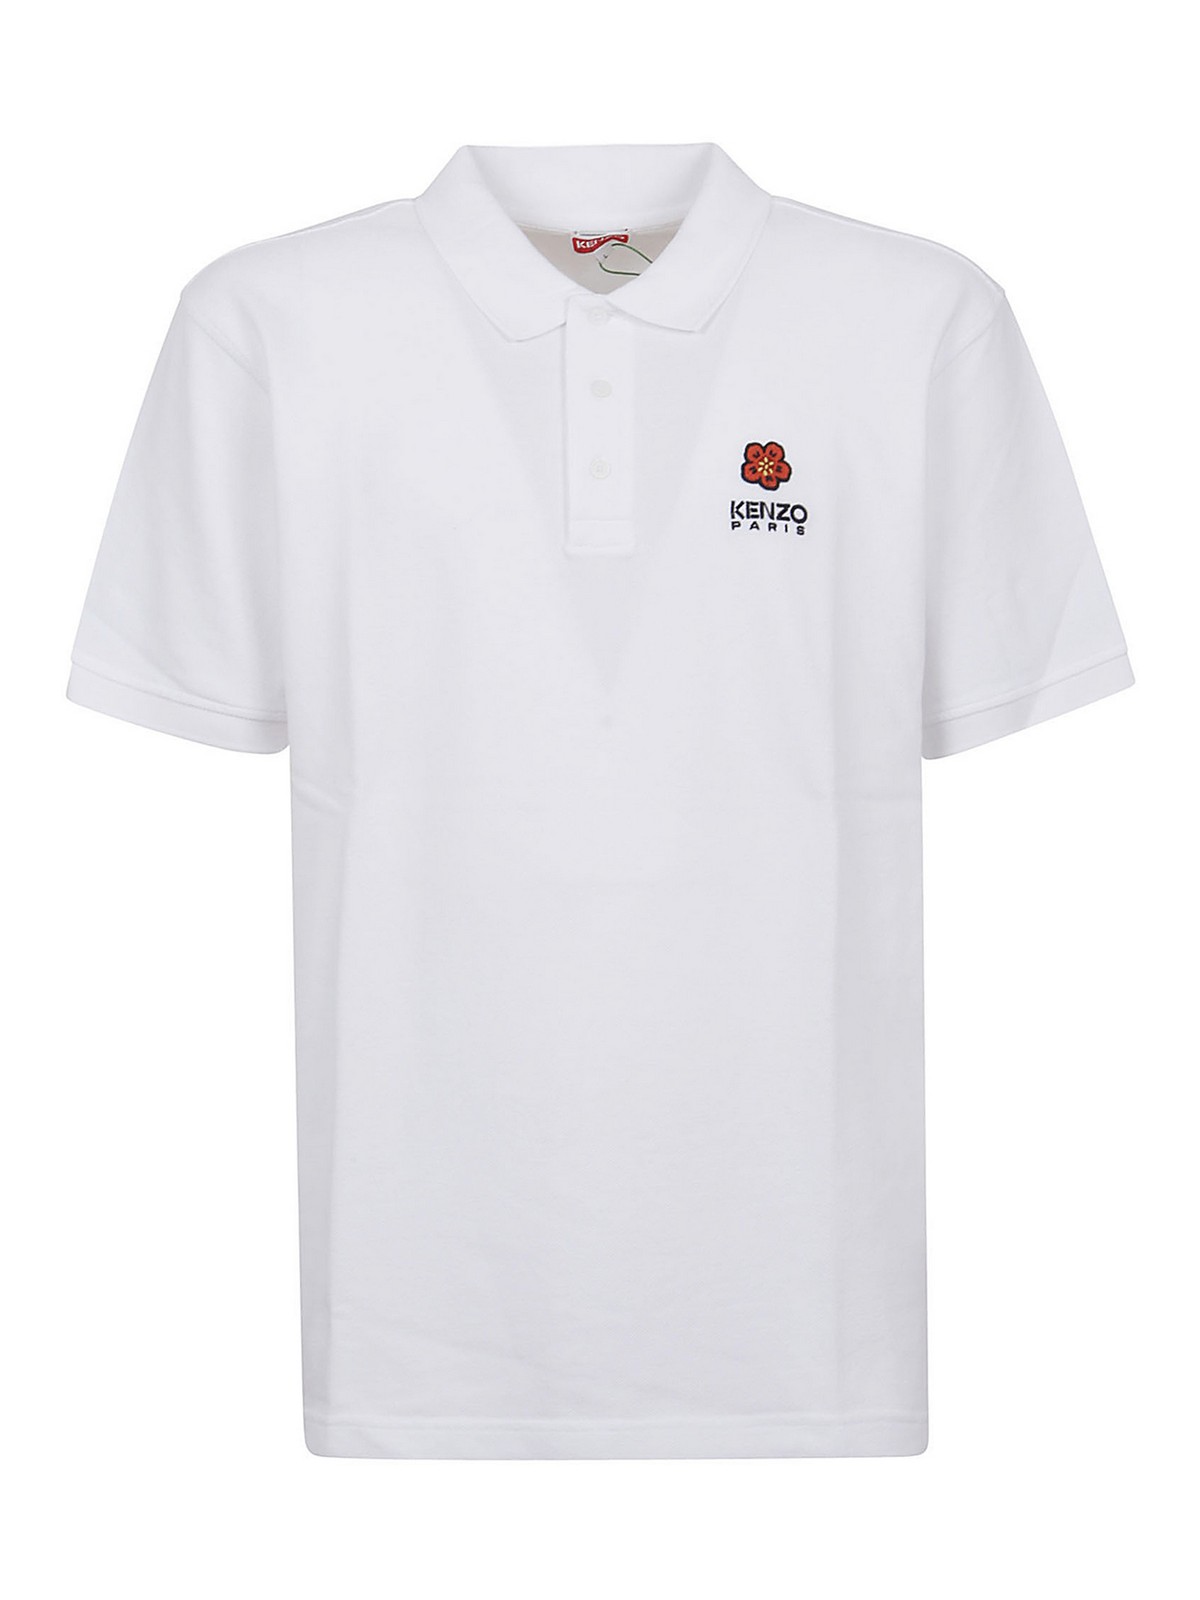 Kenzo Boke Flower Embroidered Polo Shirt In White